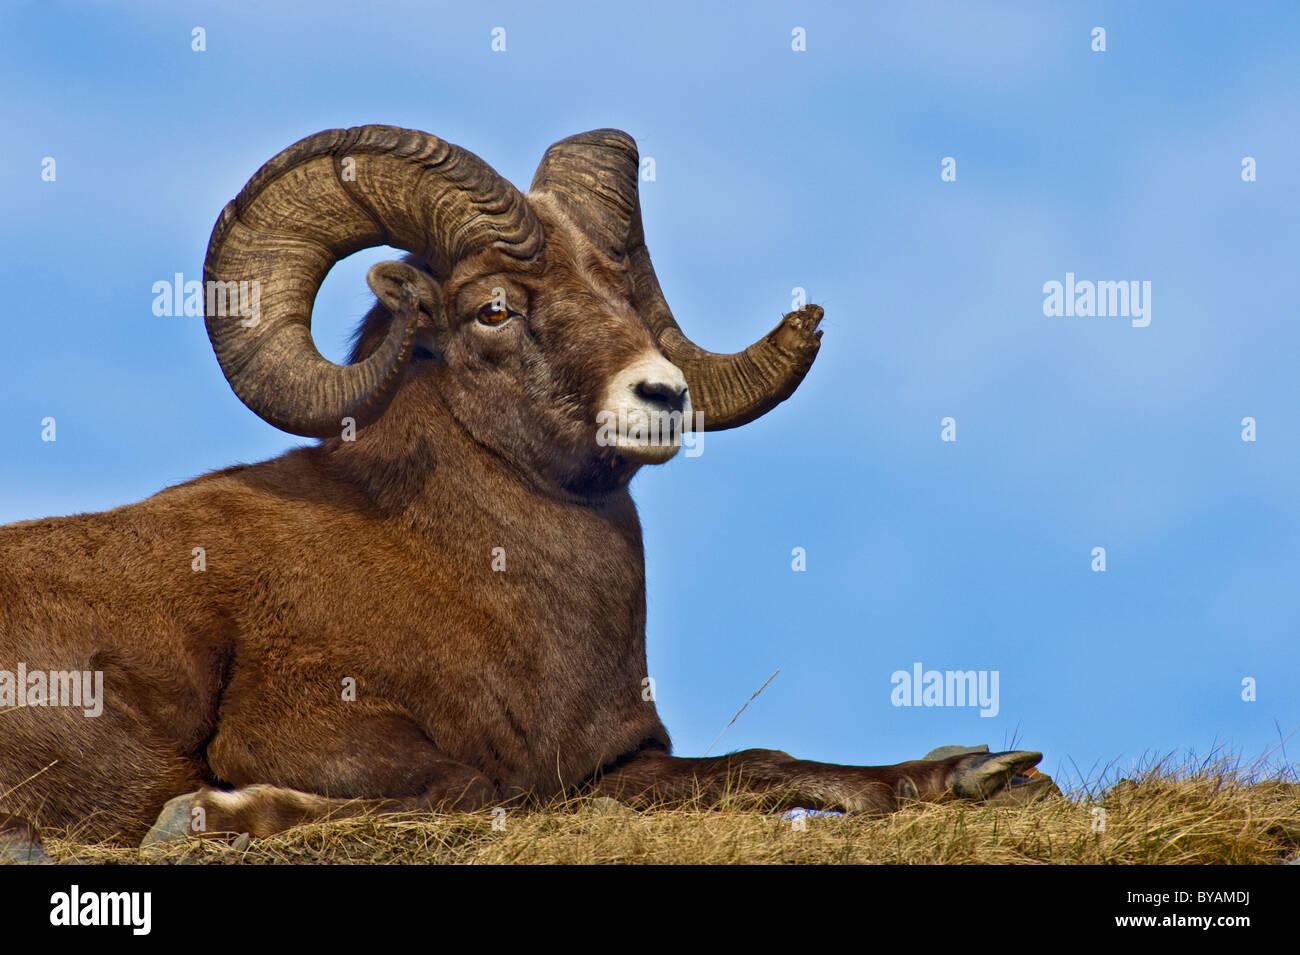 A Bighorn Sheep laying down on a grassy spot Stock Photo